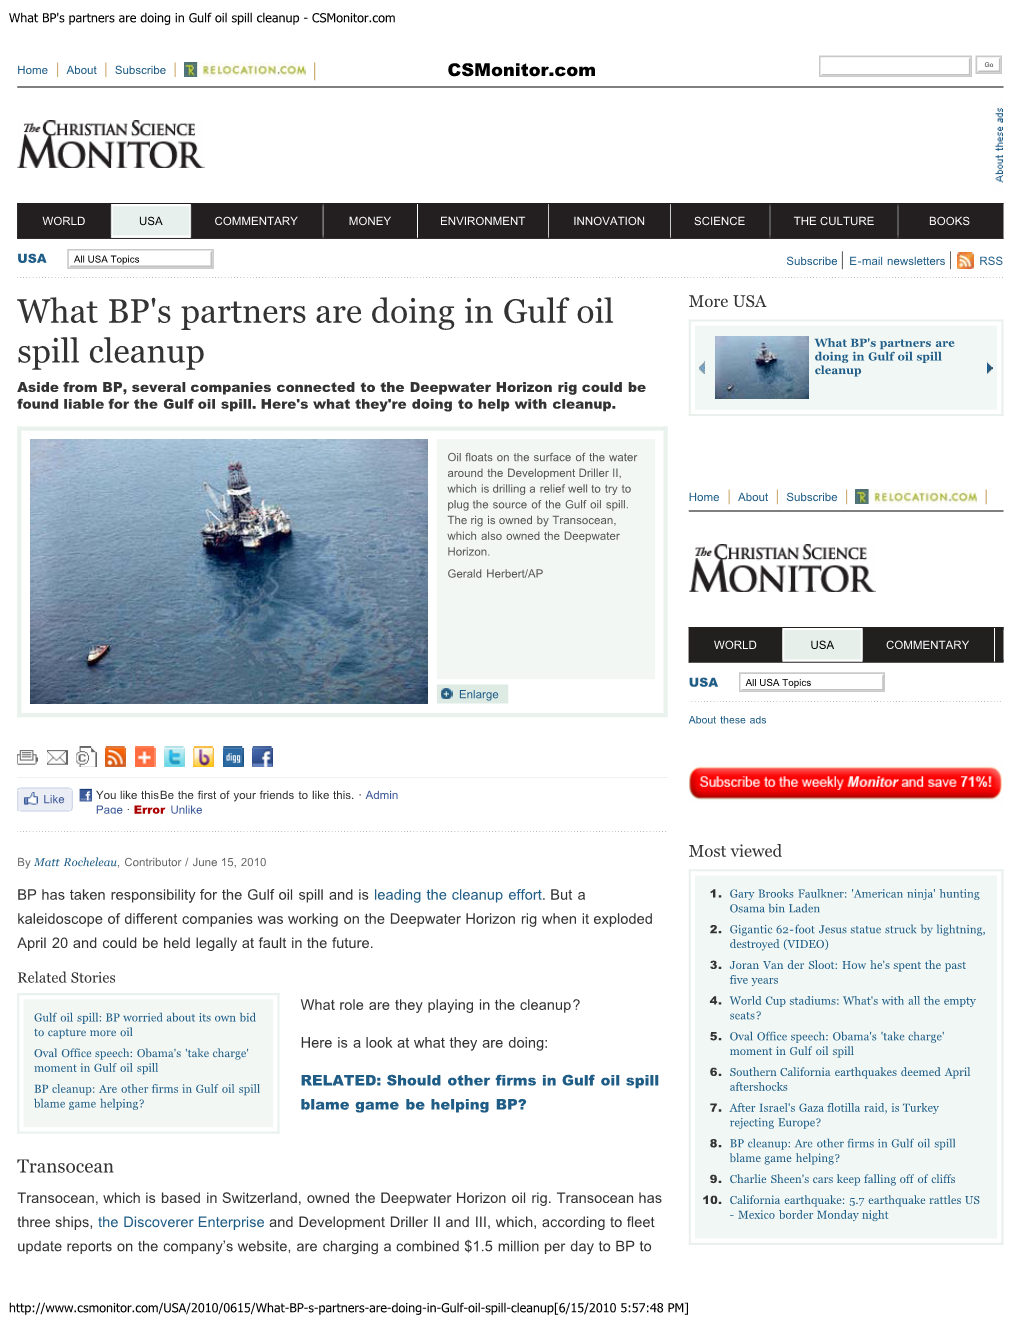 What BP's Partners Are Doing in Gulf Oil Spill Cleanup - Csmonitor.Com